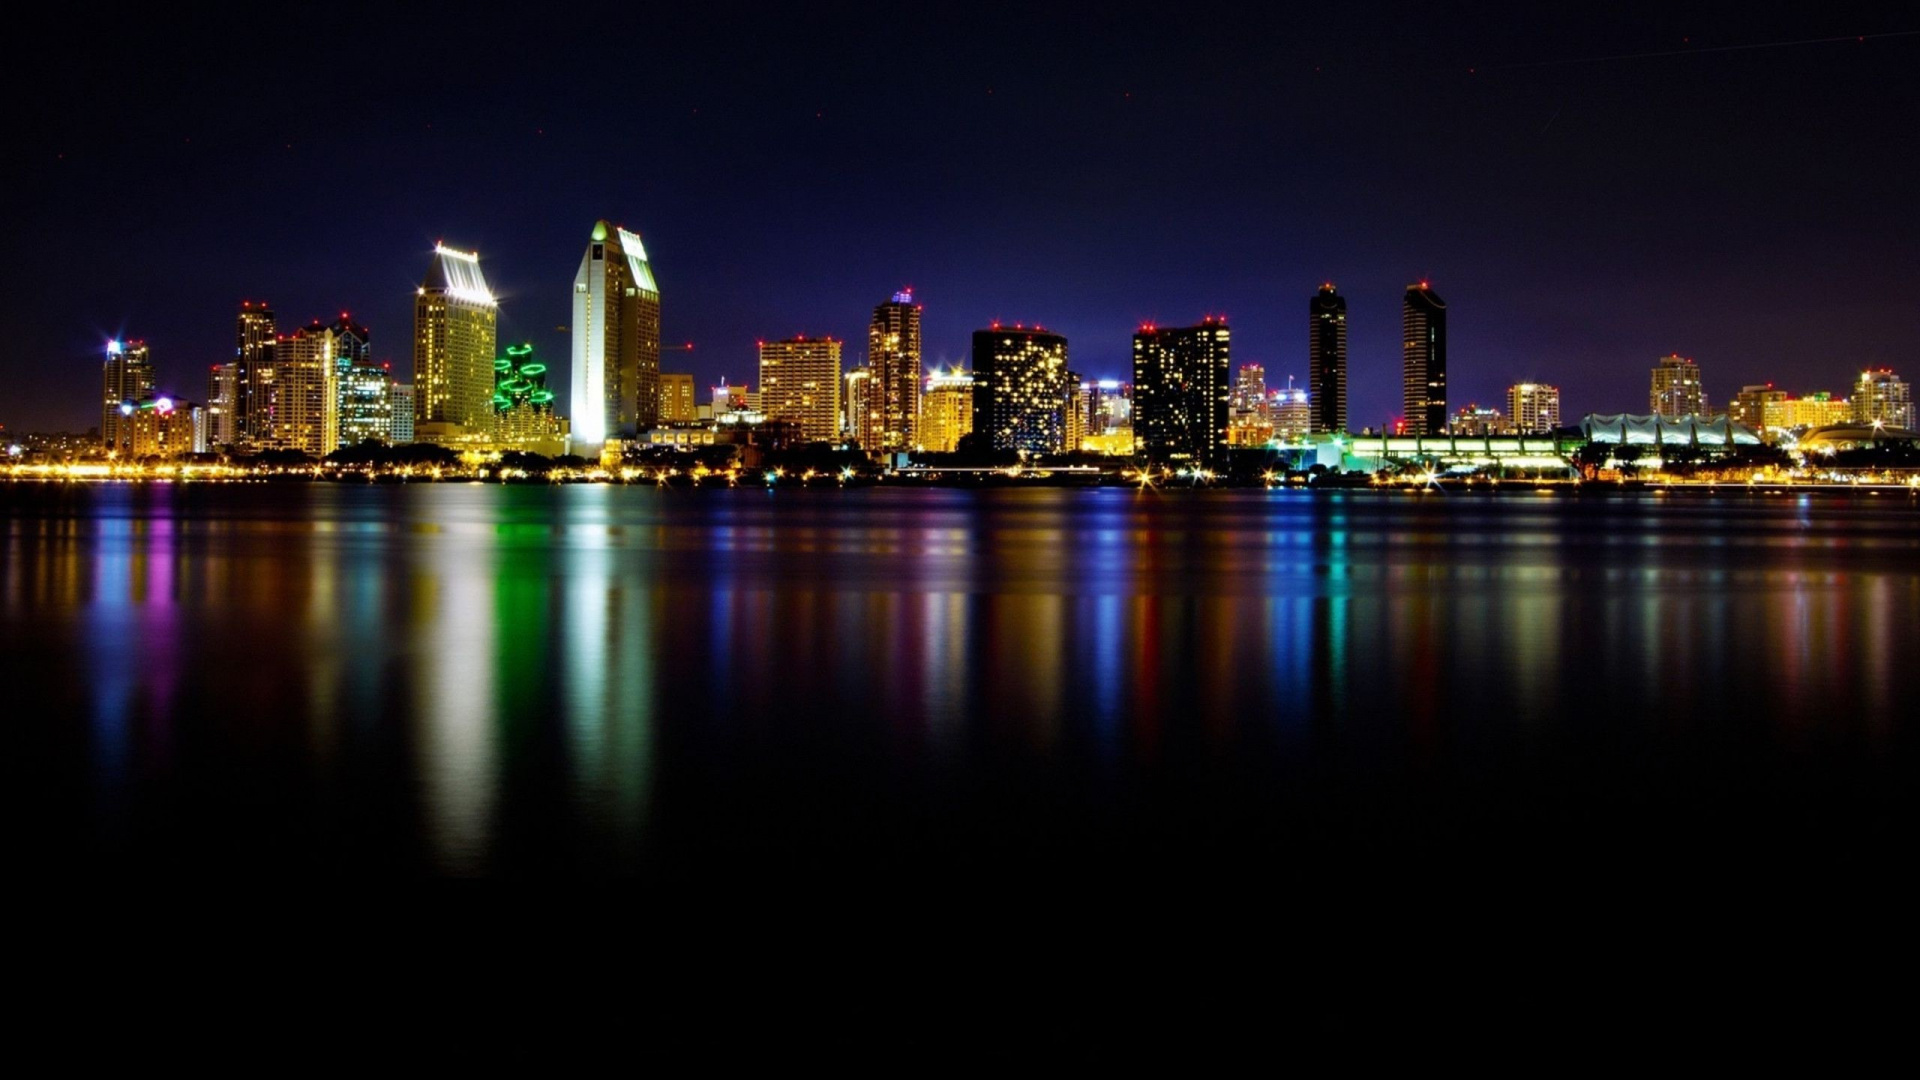 City Skyline Across Body of Water During Night Time. Wallpaper in 1920x1080 Resolution